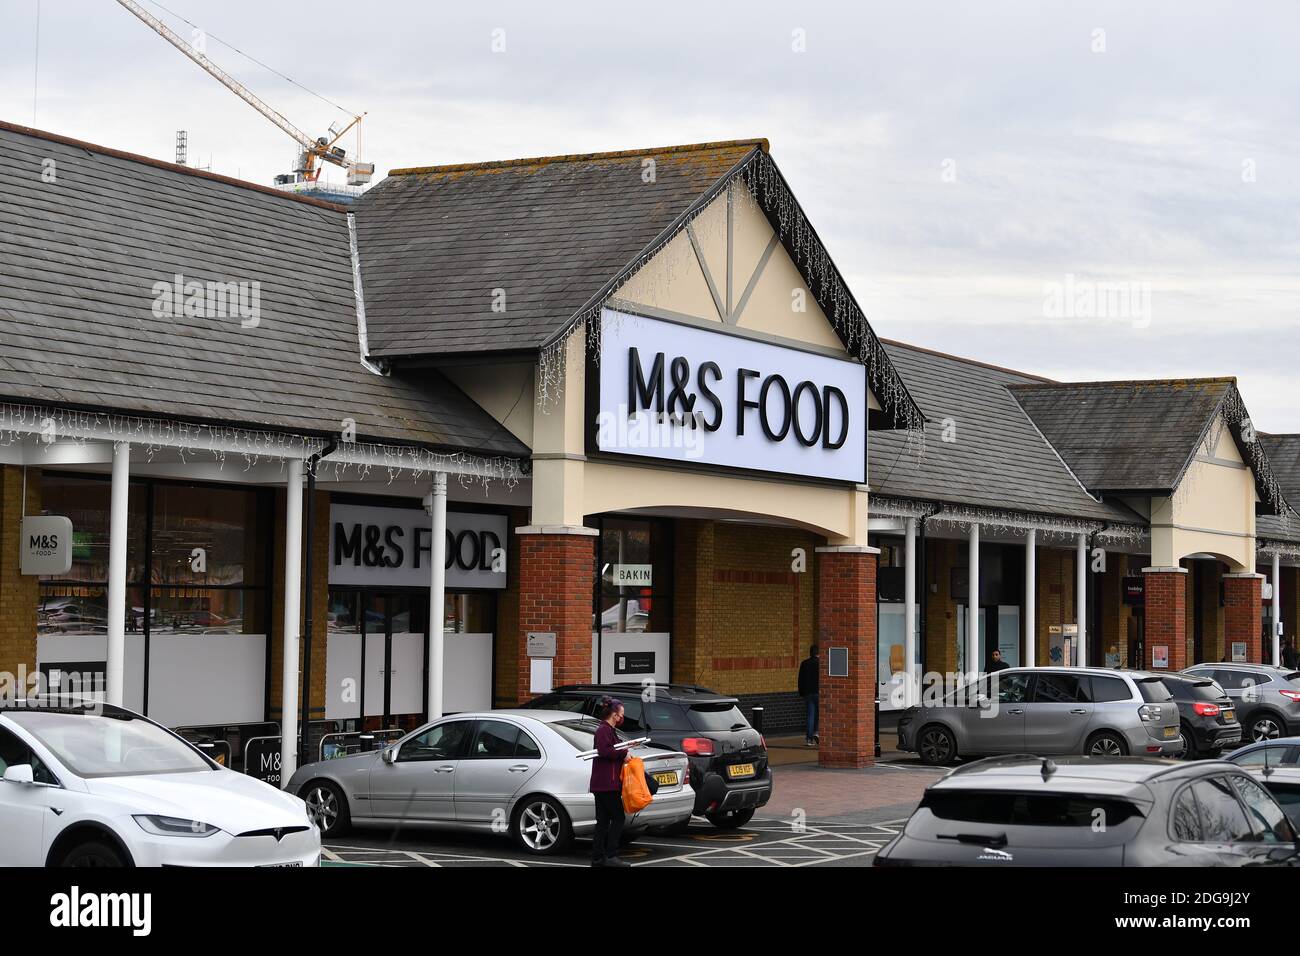 Marks & Spencer M&S Food Shop in Two Rivers, Staines, Surrey, Thursday 2nd December 2020. Stock Photo